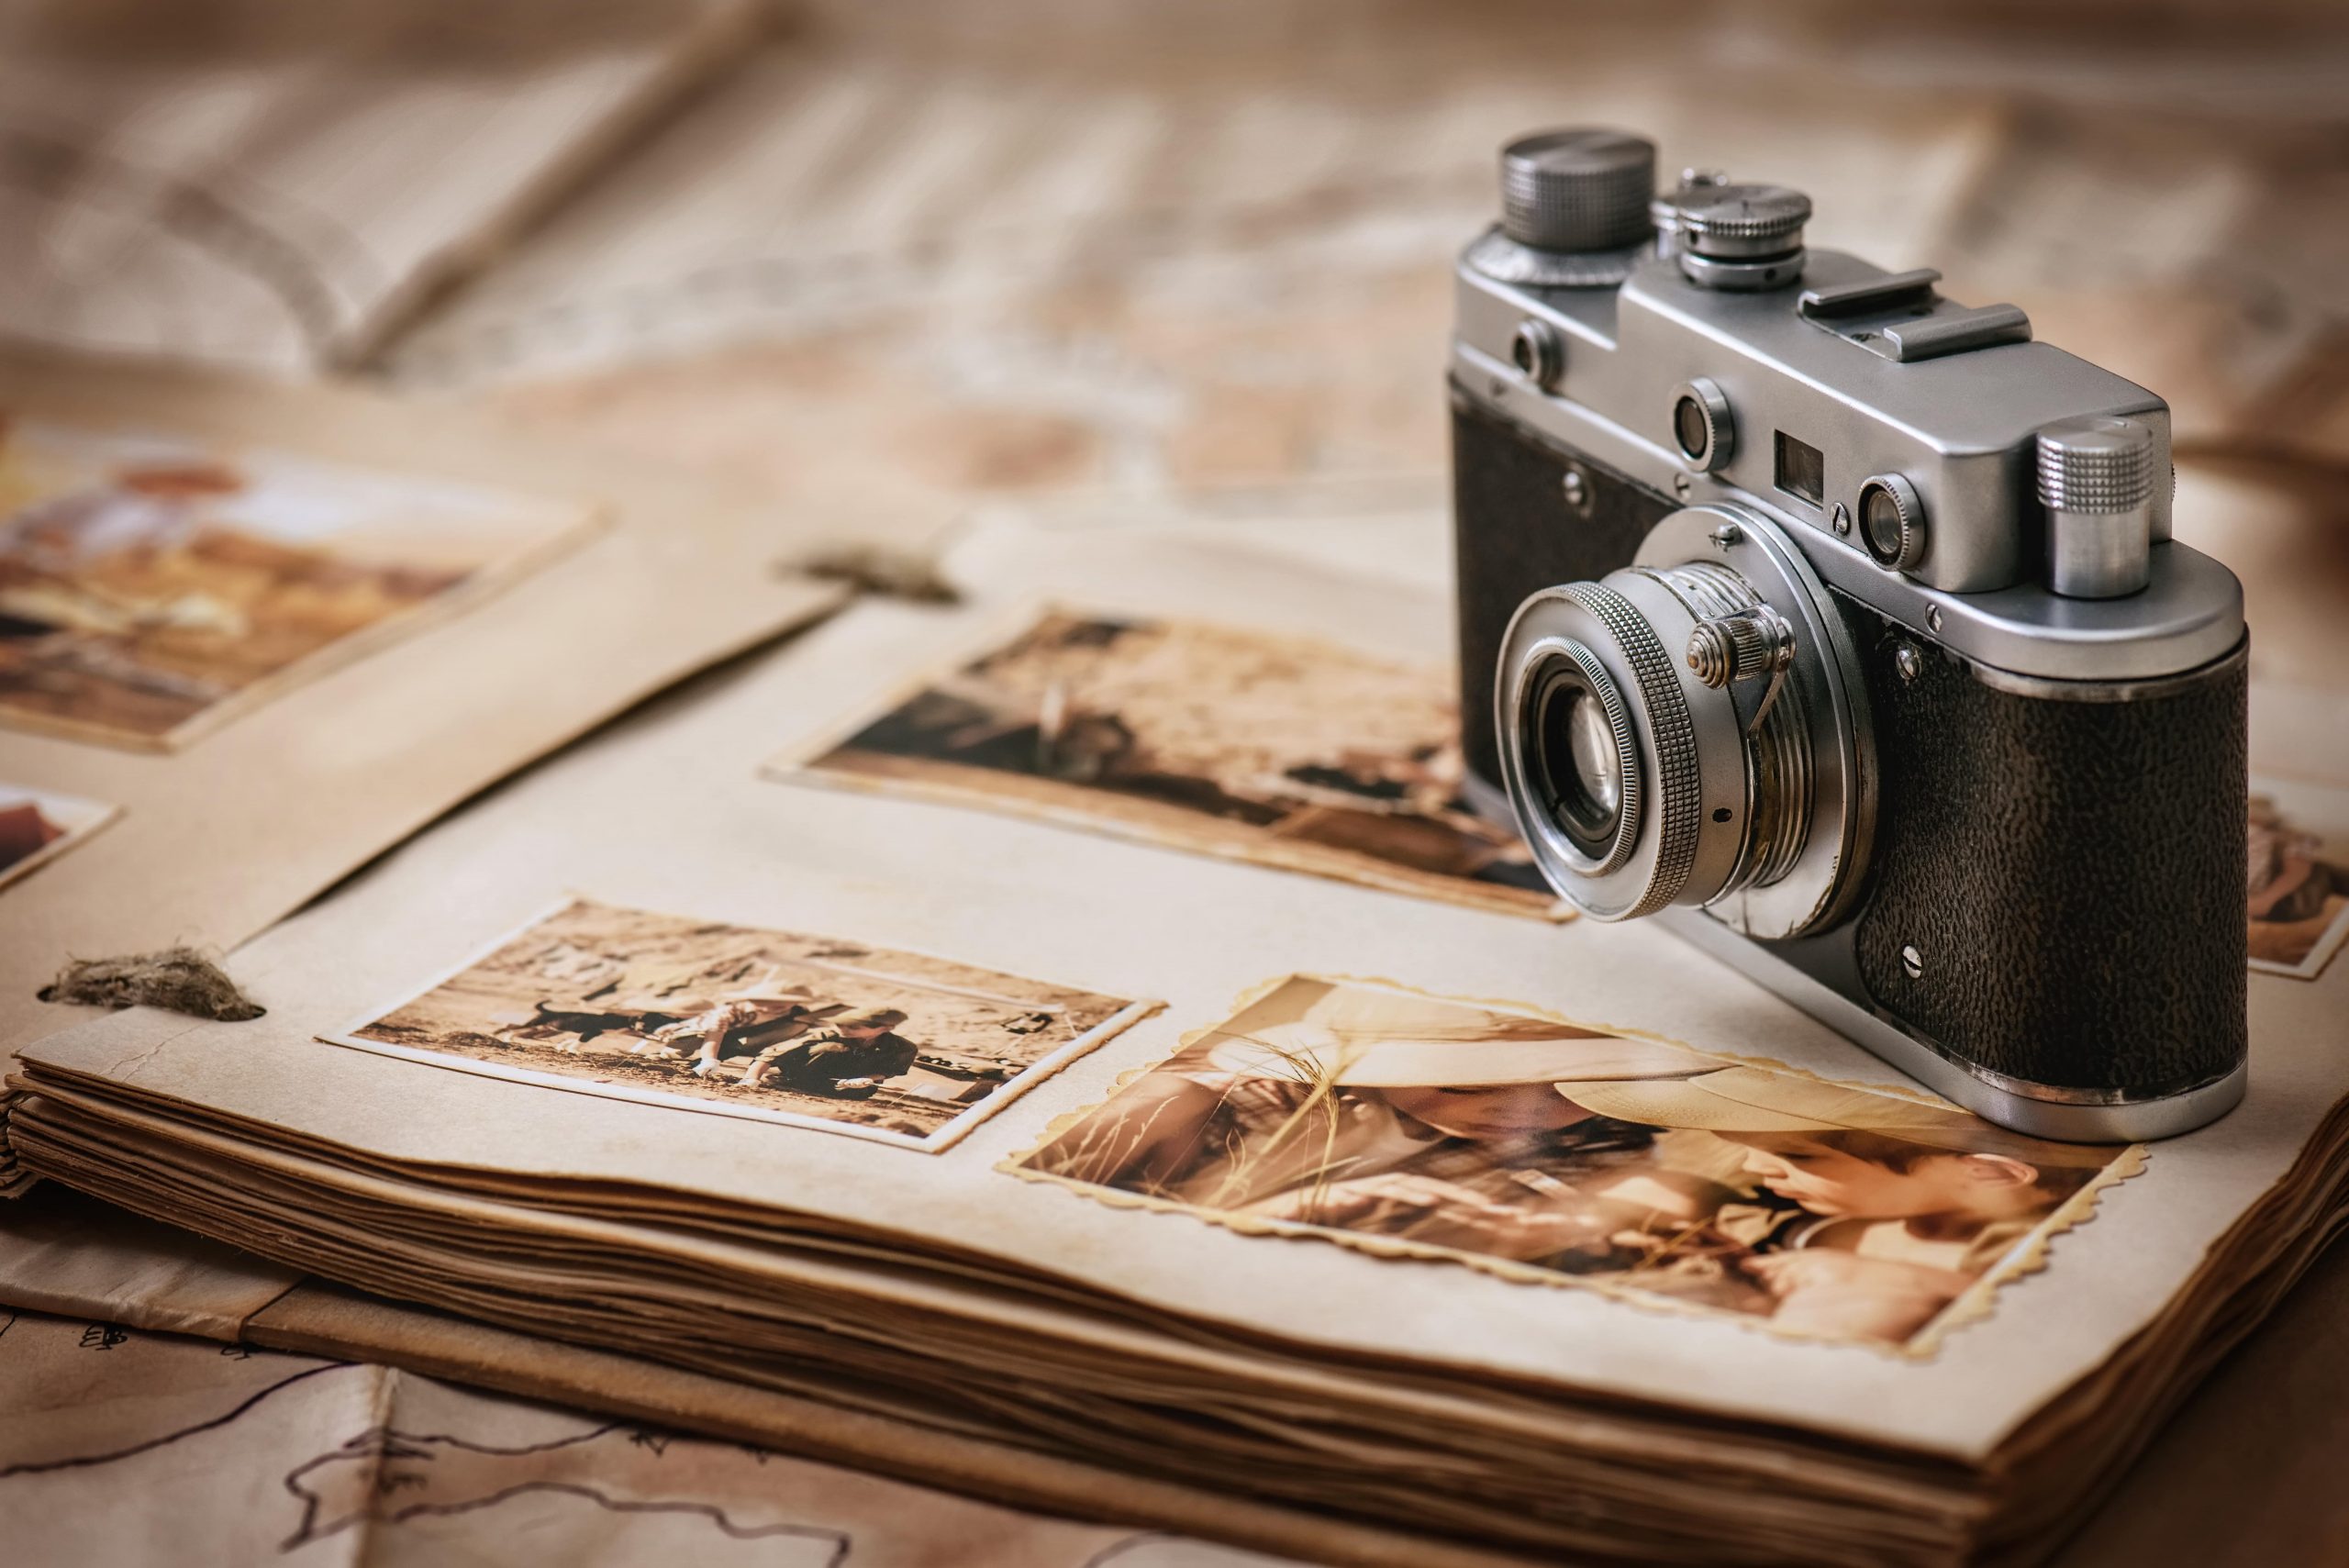 How to Use Photos to Personalize a Service